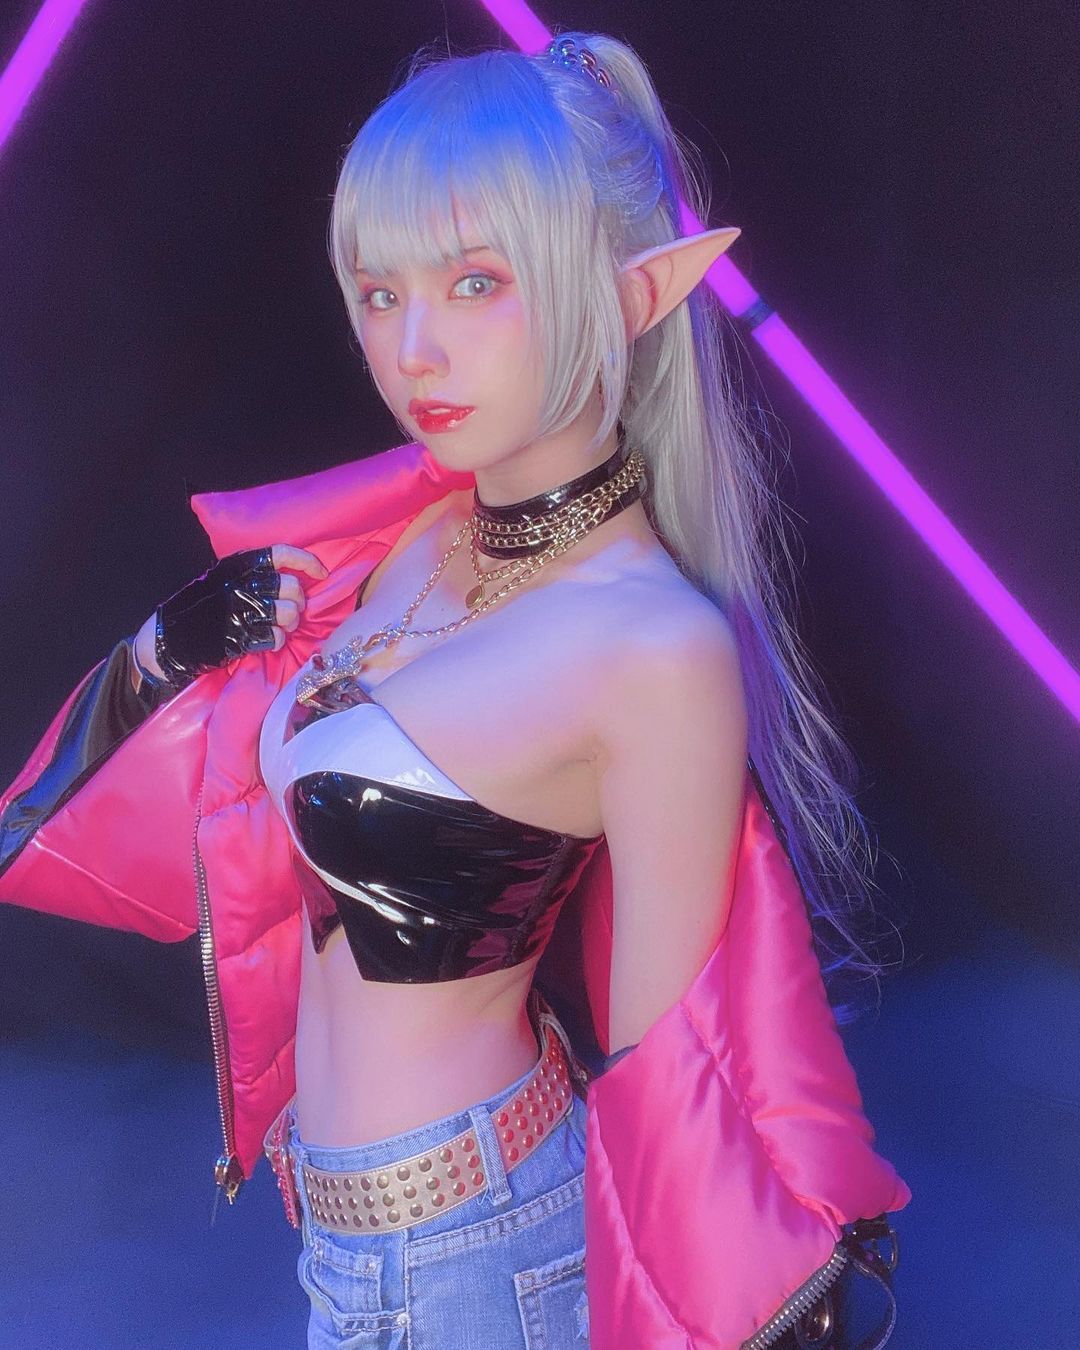 Amazing Selena S.T.U.N skin cosplay by popular Japanese cosplayer Enako as part of an official collab with mlbb!